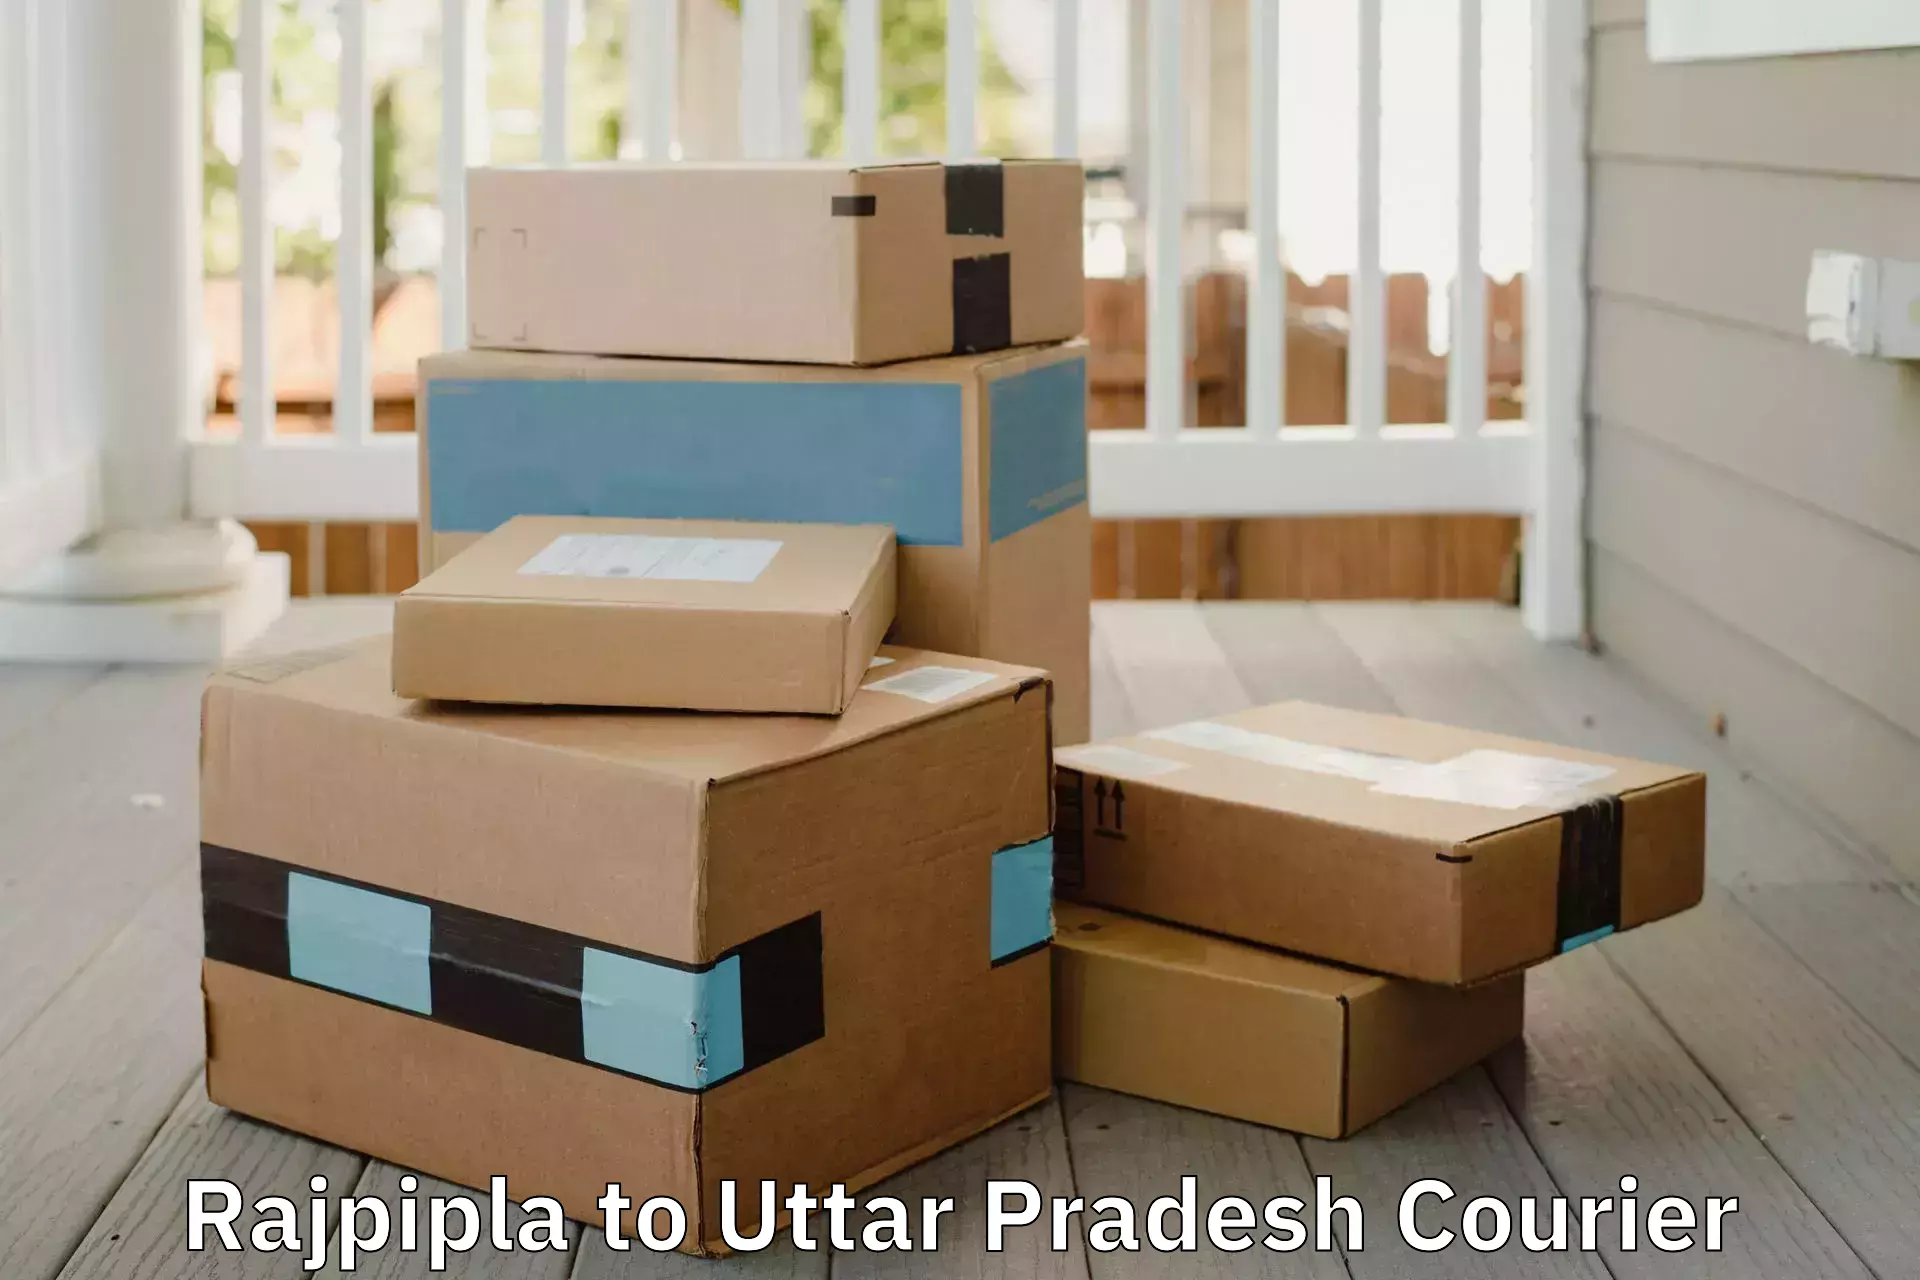 Quality moving company Rajpipla to Sultanpur